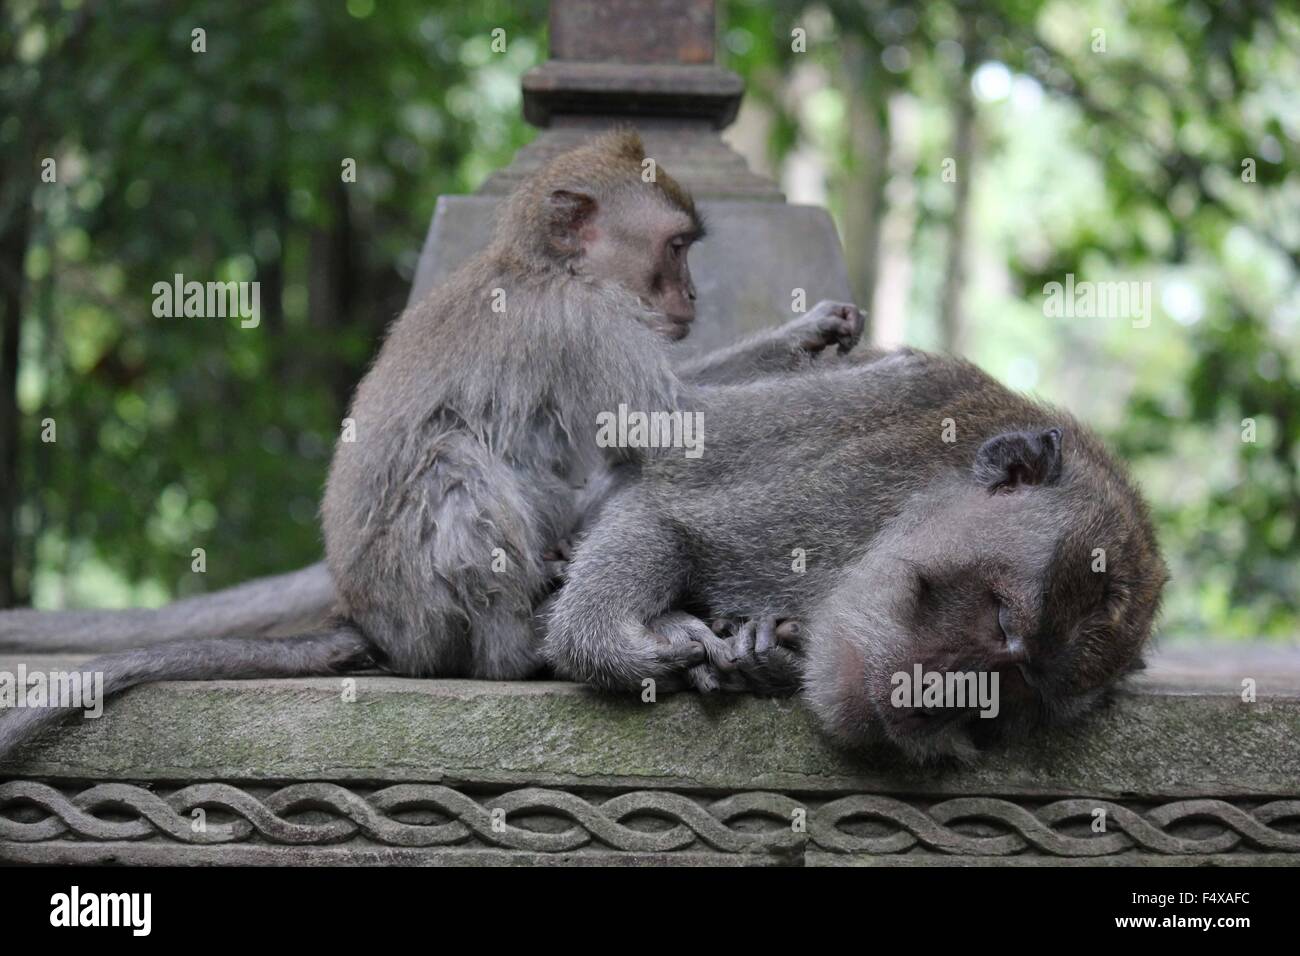 16,655 Monkey Banner Images, Stock Photos, 3D objects, & Vectors |  Shutterstock